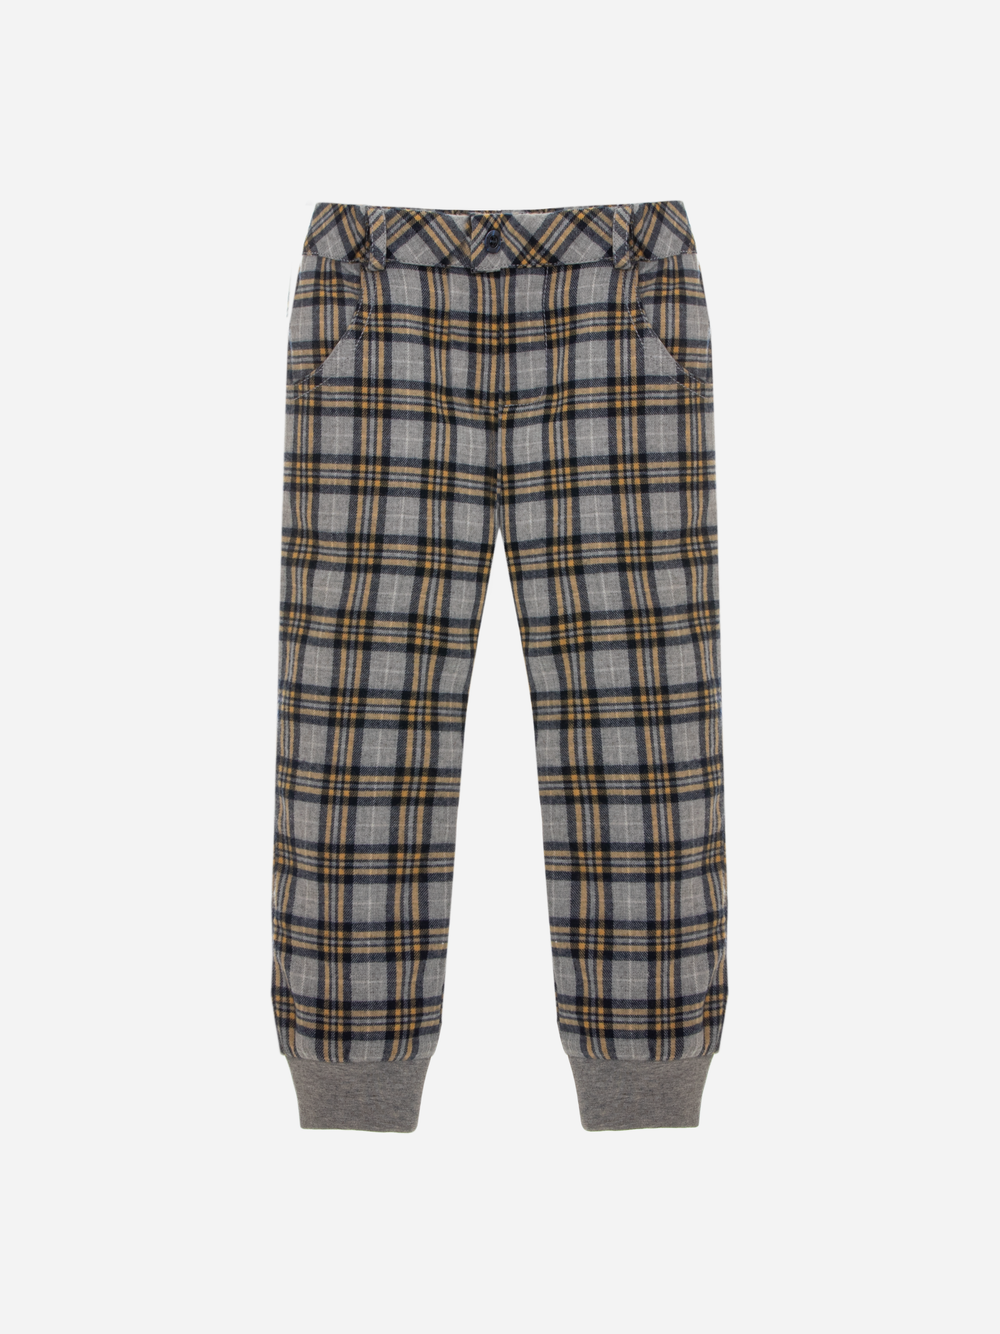 Grey Check Flannel Pants 